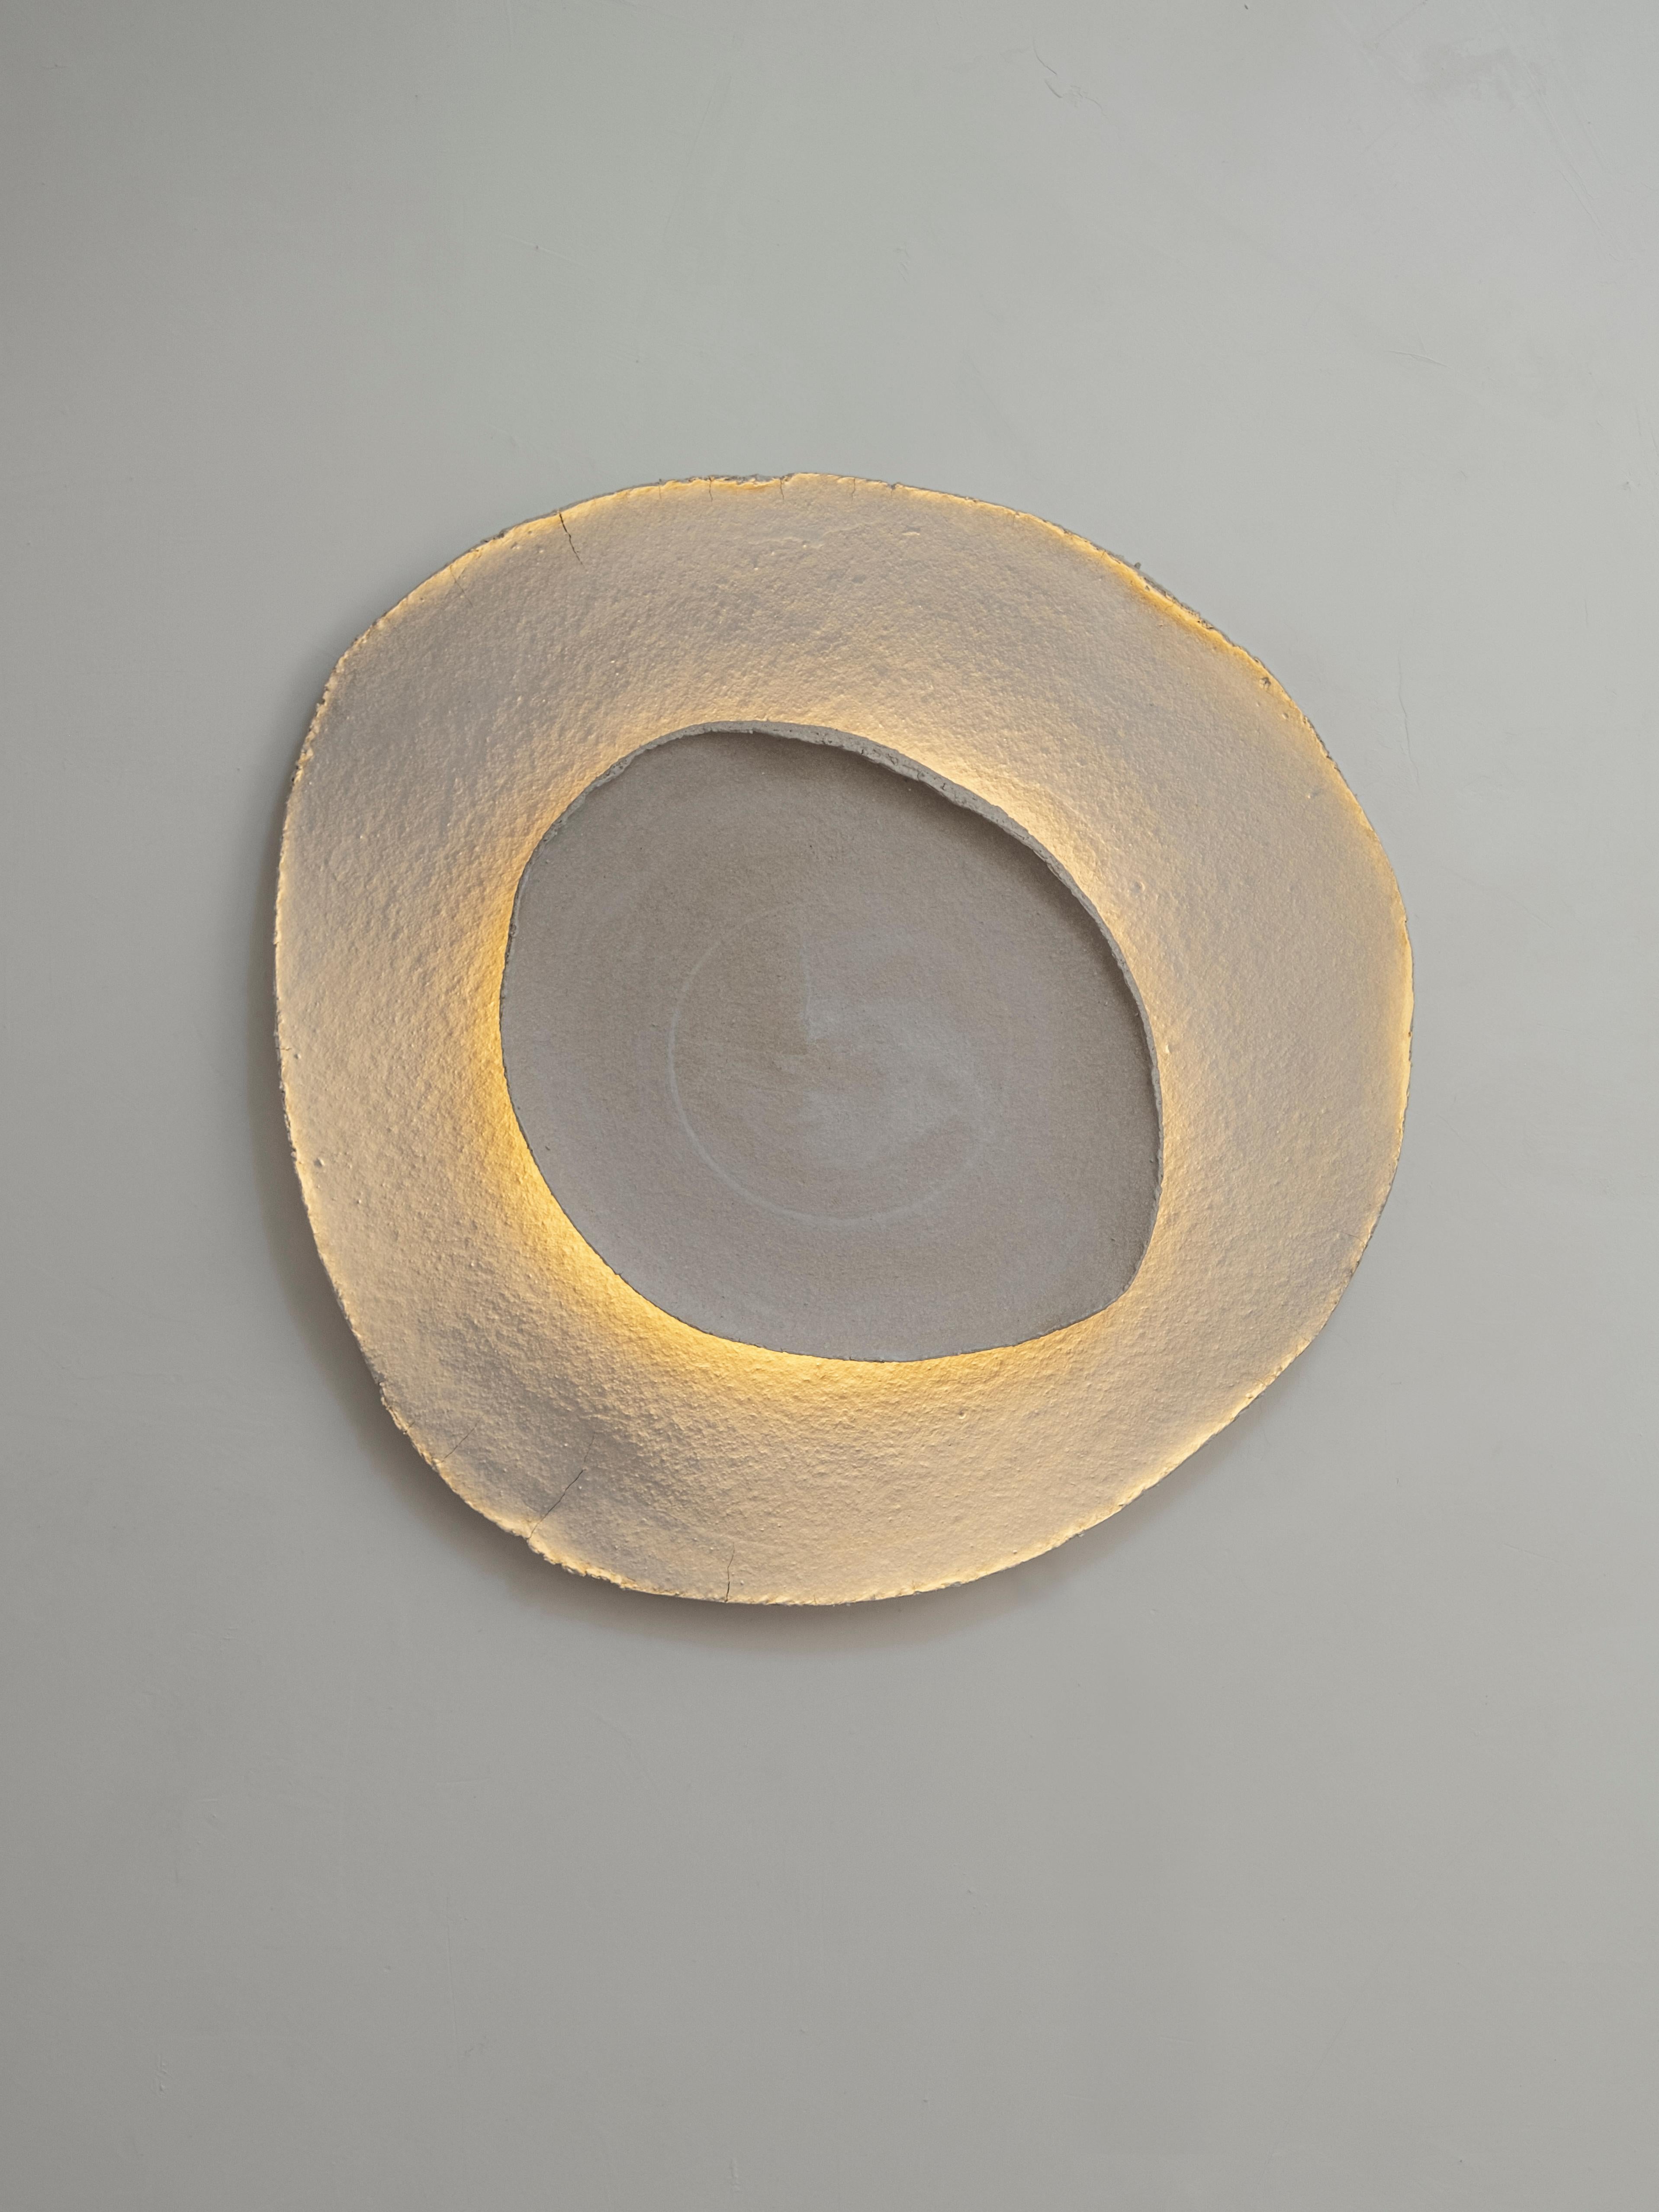 Bone #19 wall light by Margaux Leycuras.
One of a Kind, Signed and numbered.
Dimensions: Ø56 cm.
Material: Ceramic, sand stoneware tops with a porcelain engobe finish.
The piece is signed, numbered and delivered with a certificate of